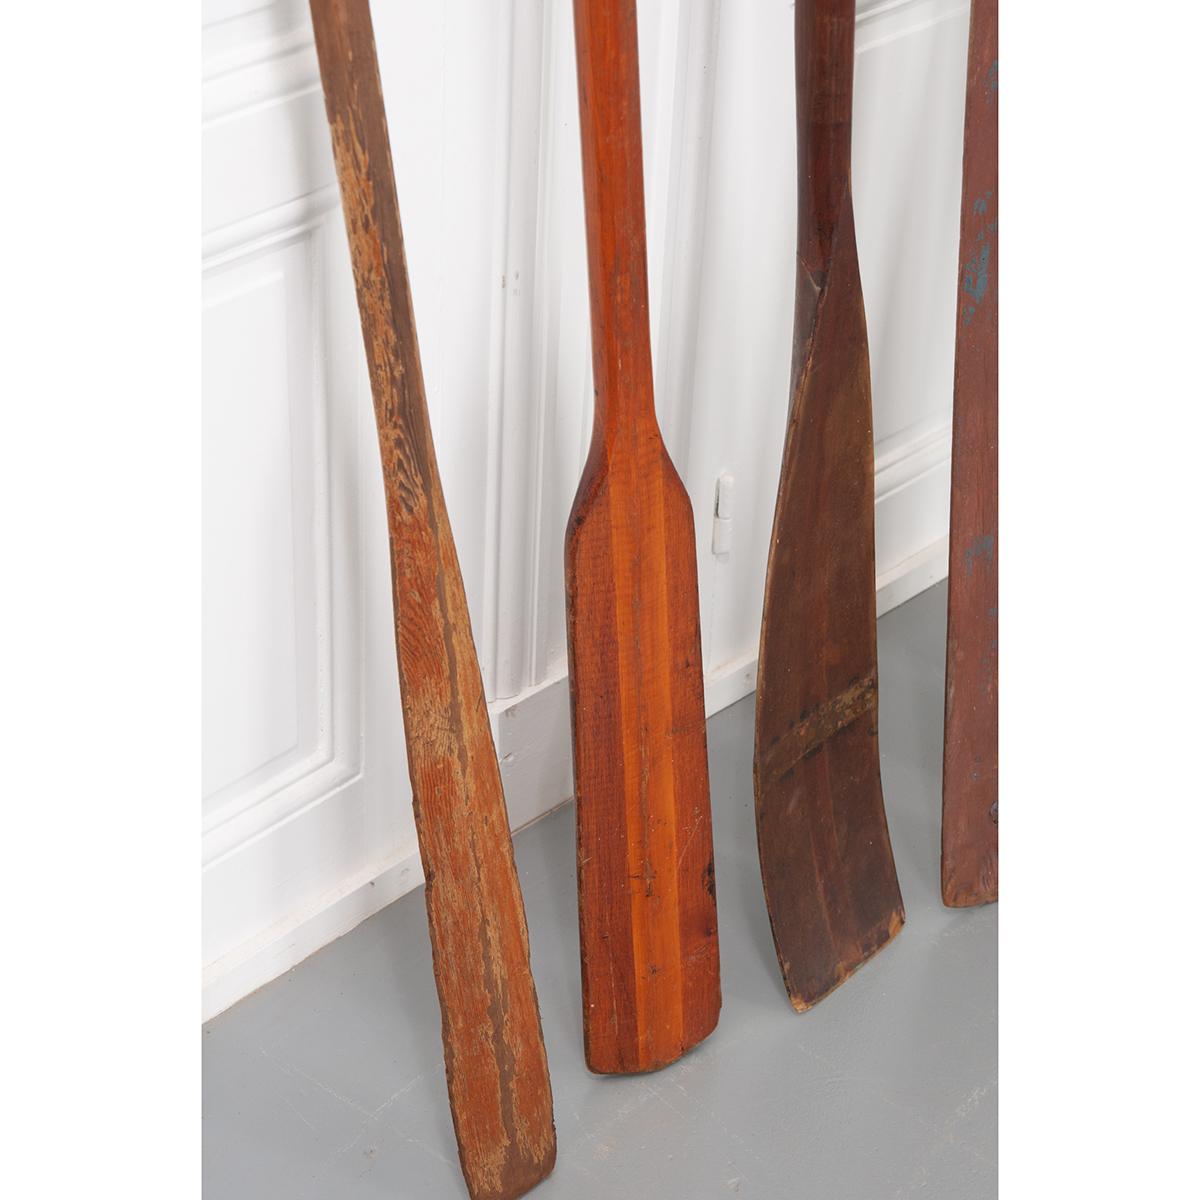 20th Century Collection of 10 Vintage Oars